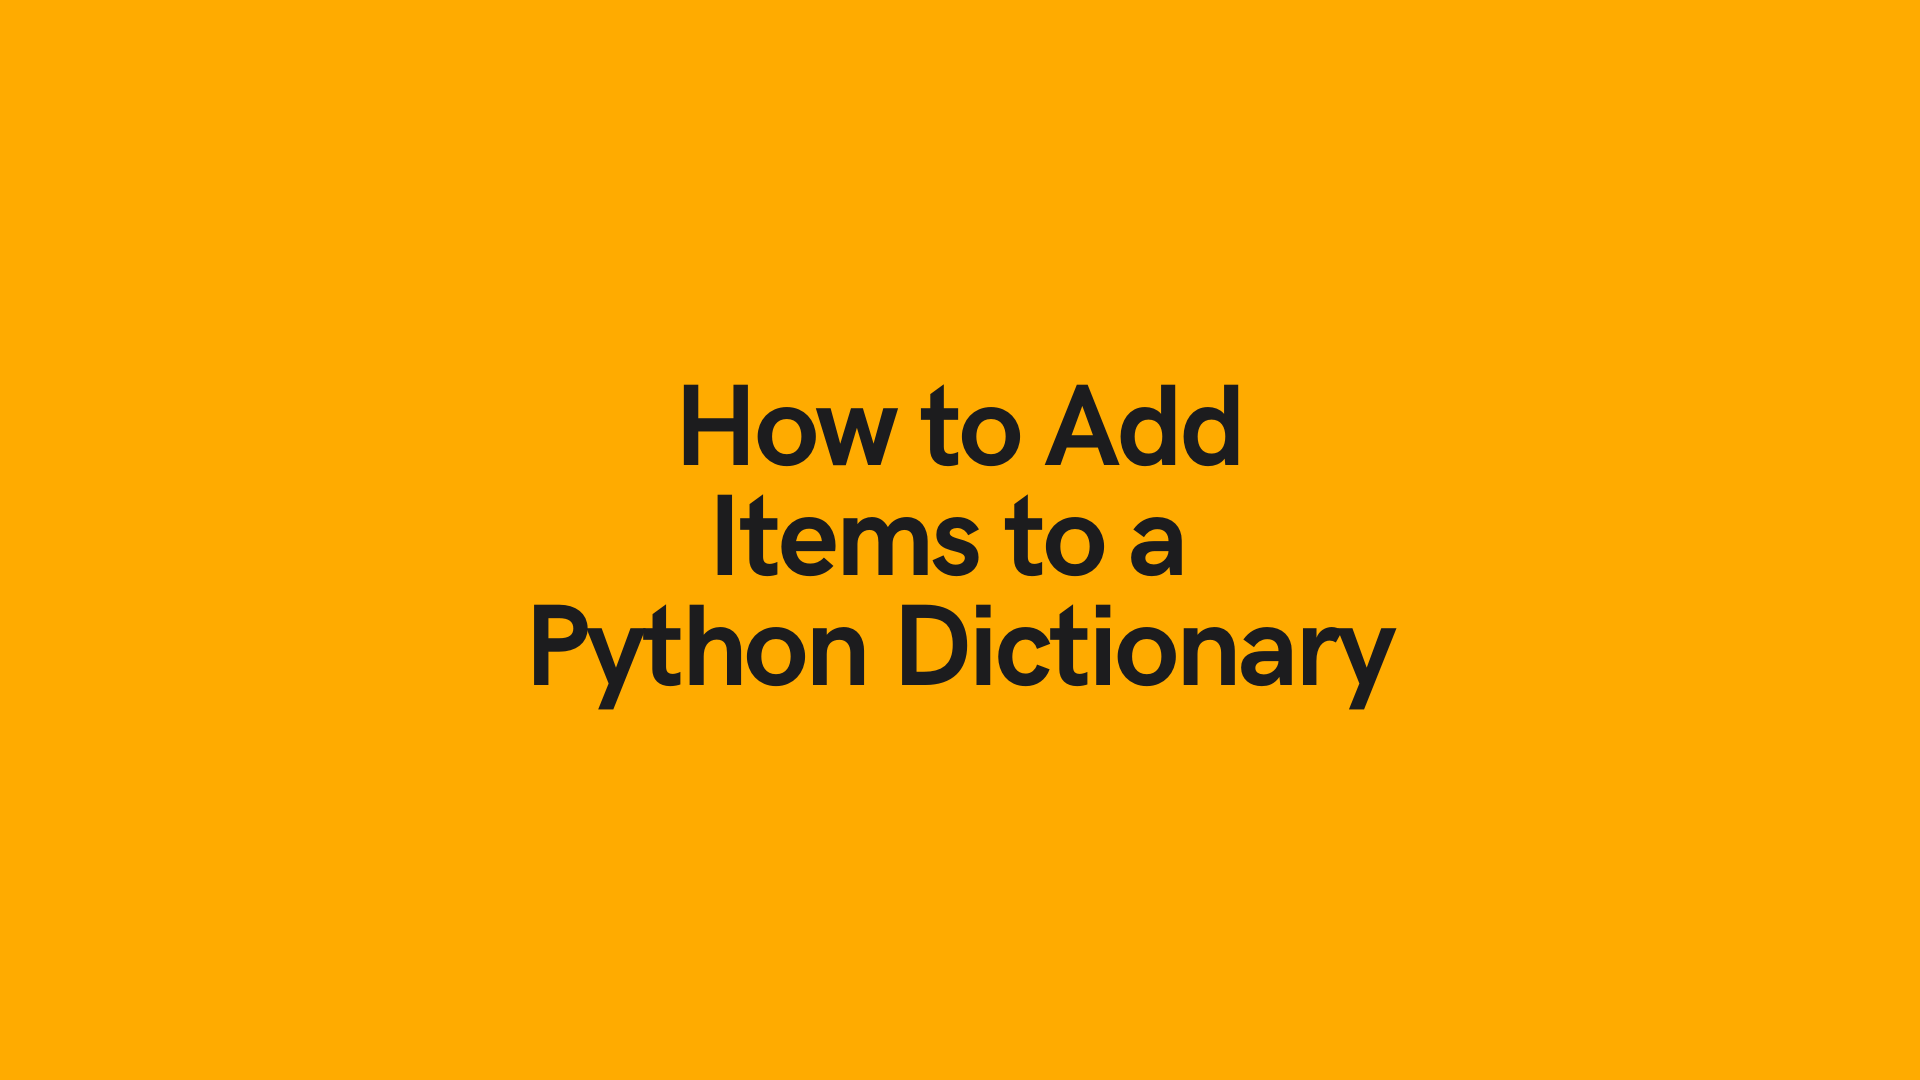 How To Add Items To A Python Dictionary Cover Image 